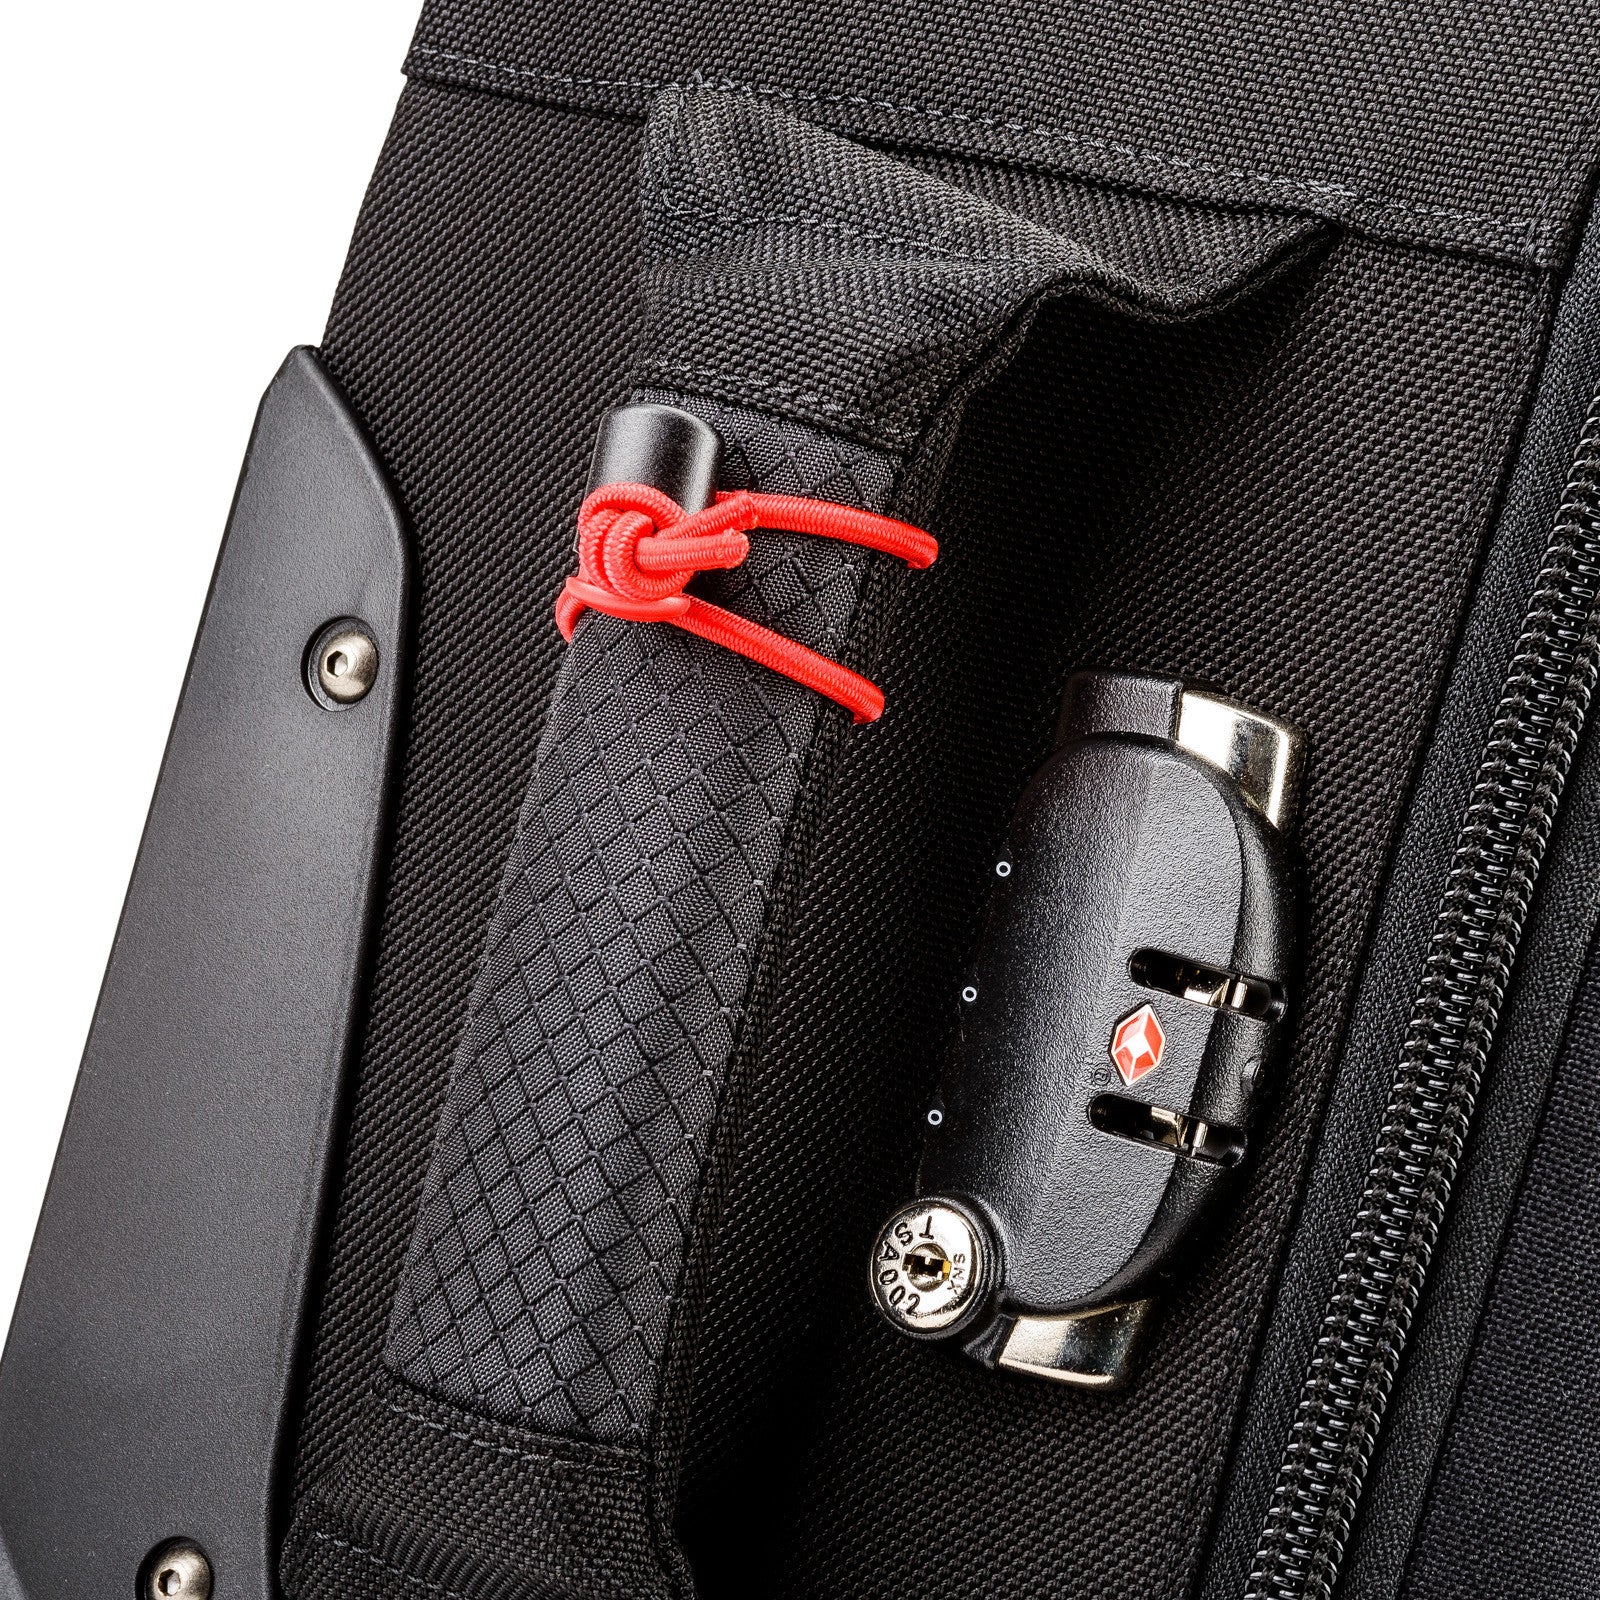 Bright red color keeps them visible in or on your bag